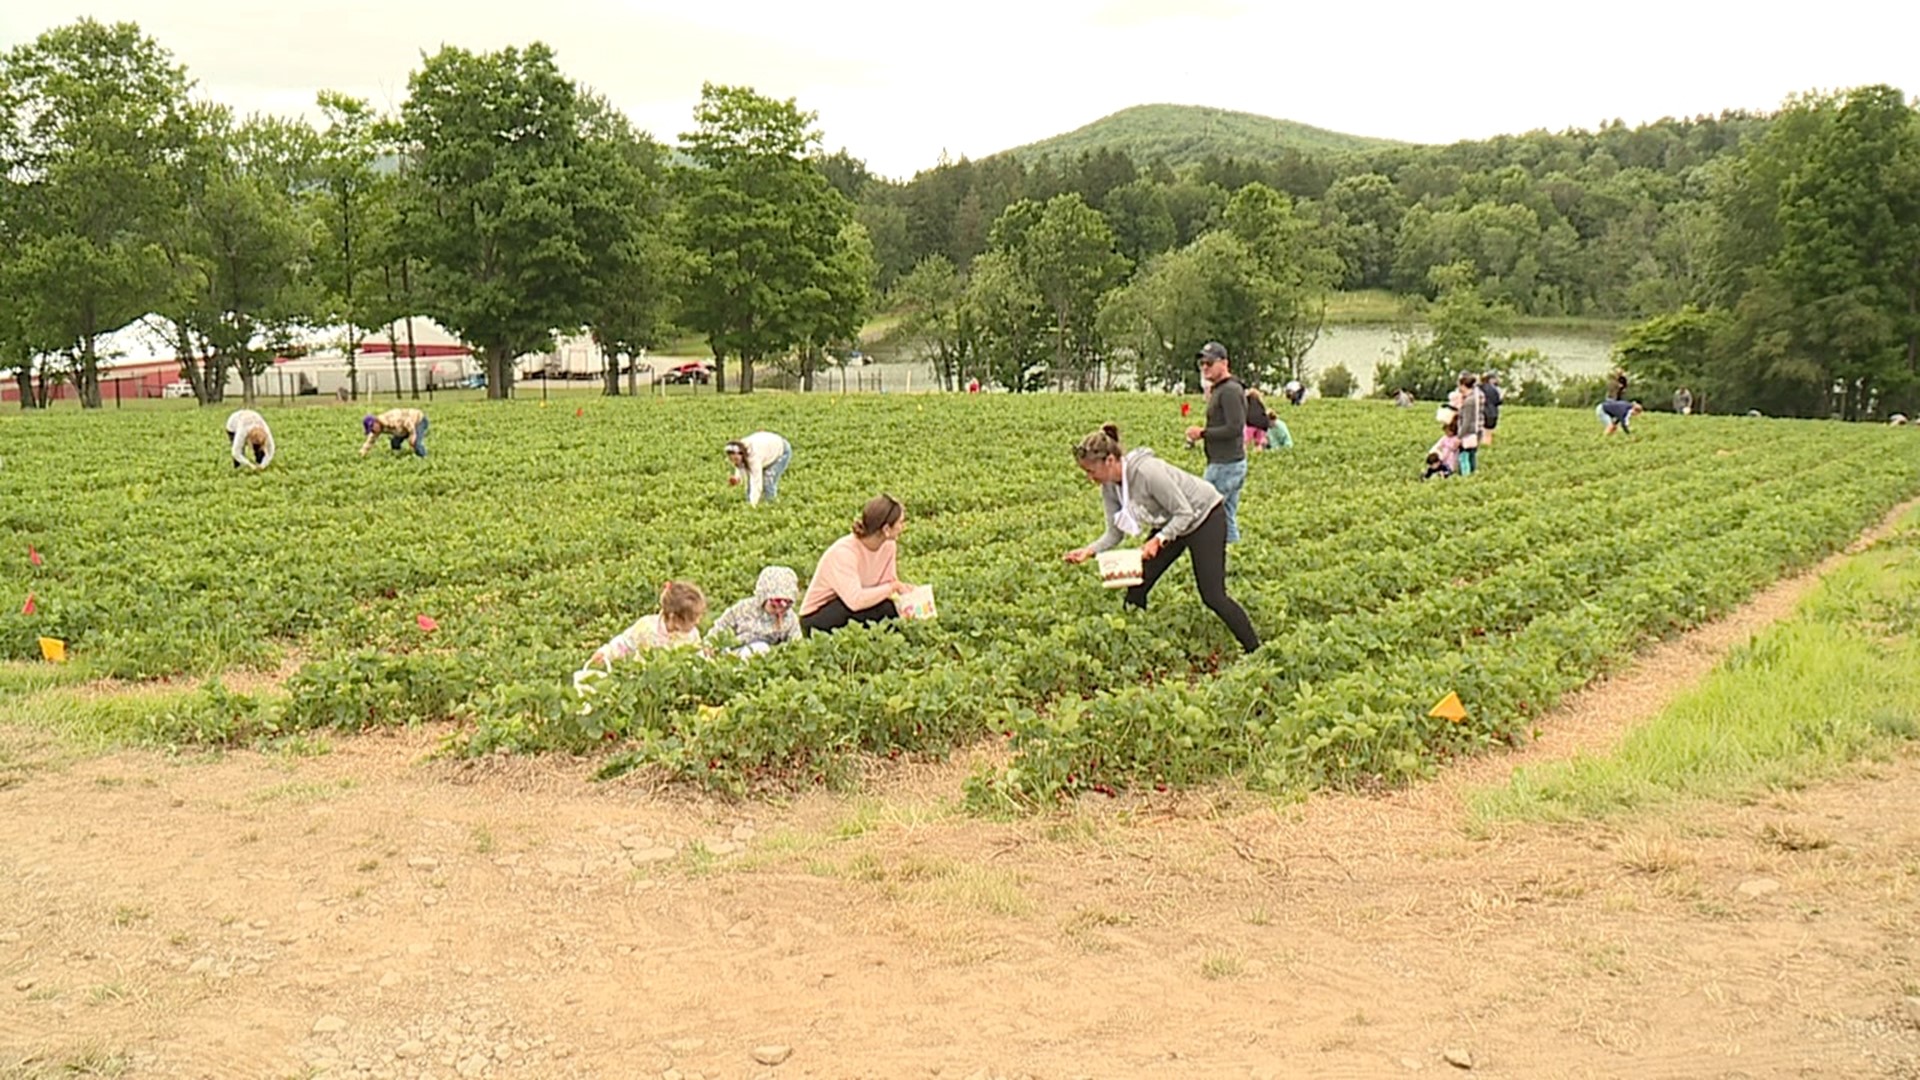 Pallman Farms in Clarks Summit is officially open and ready for strawberry picking.